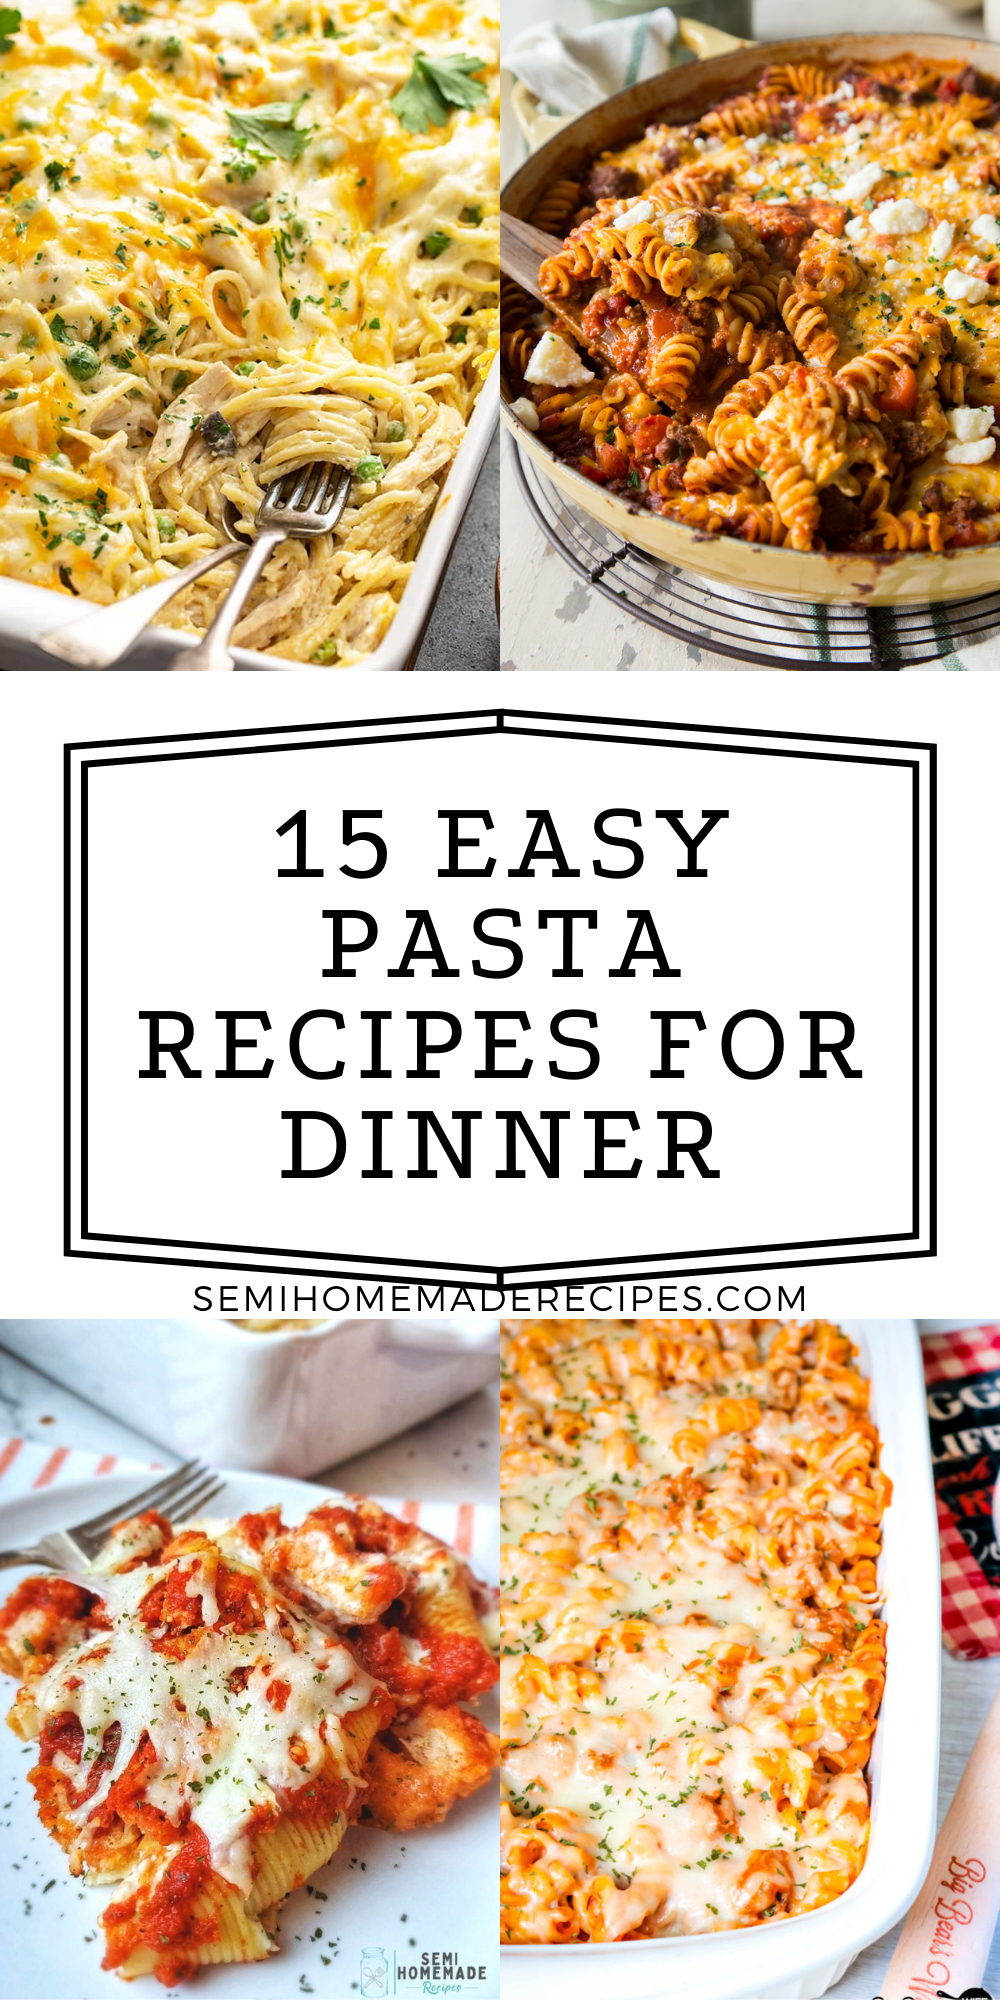 Love Pasta and need some easy dinner ideas? You've come to the right place! Here are 15 Easy Pasta Recipes for Dinner or lunch that you're going to love! 